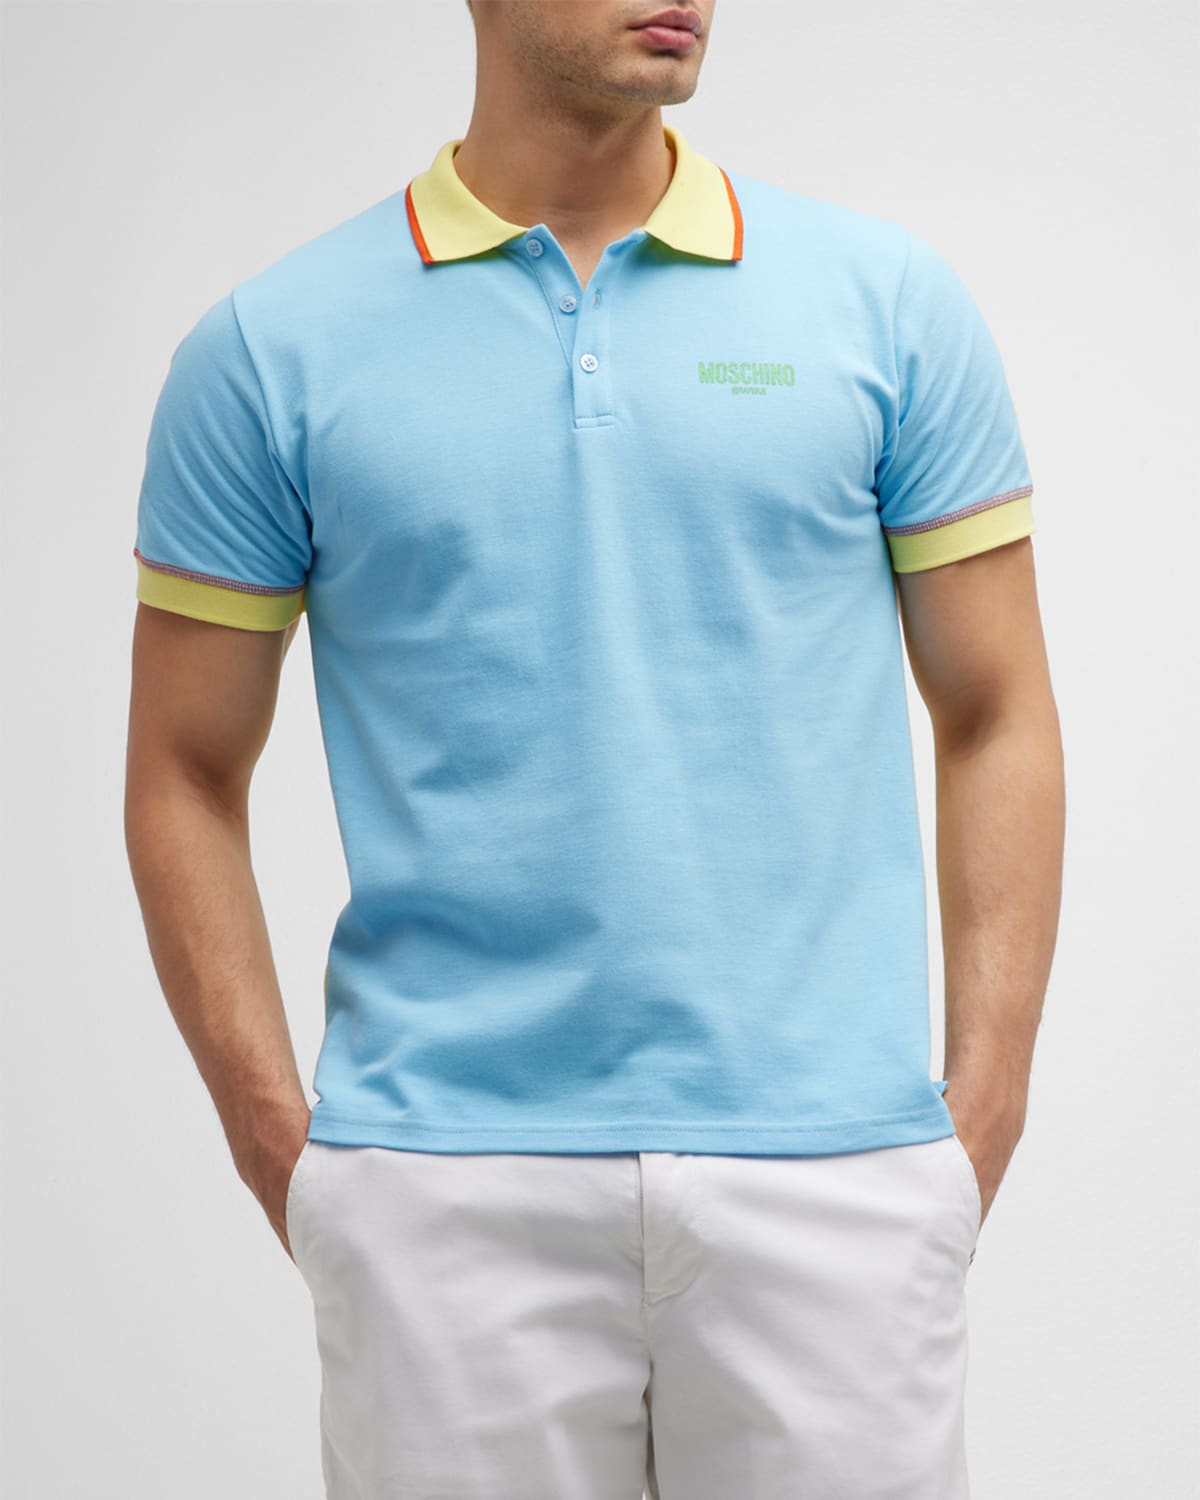 Moschino Men's Tipped Colorblock Polo Shirt In Light Blue Multi